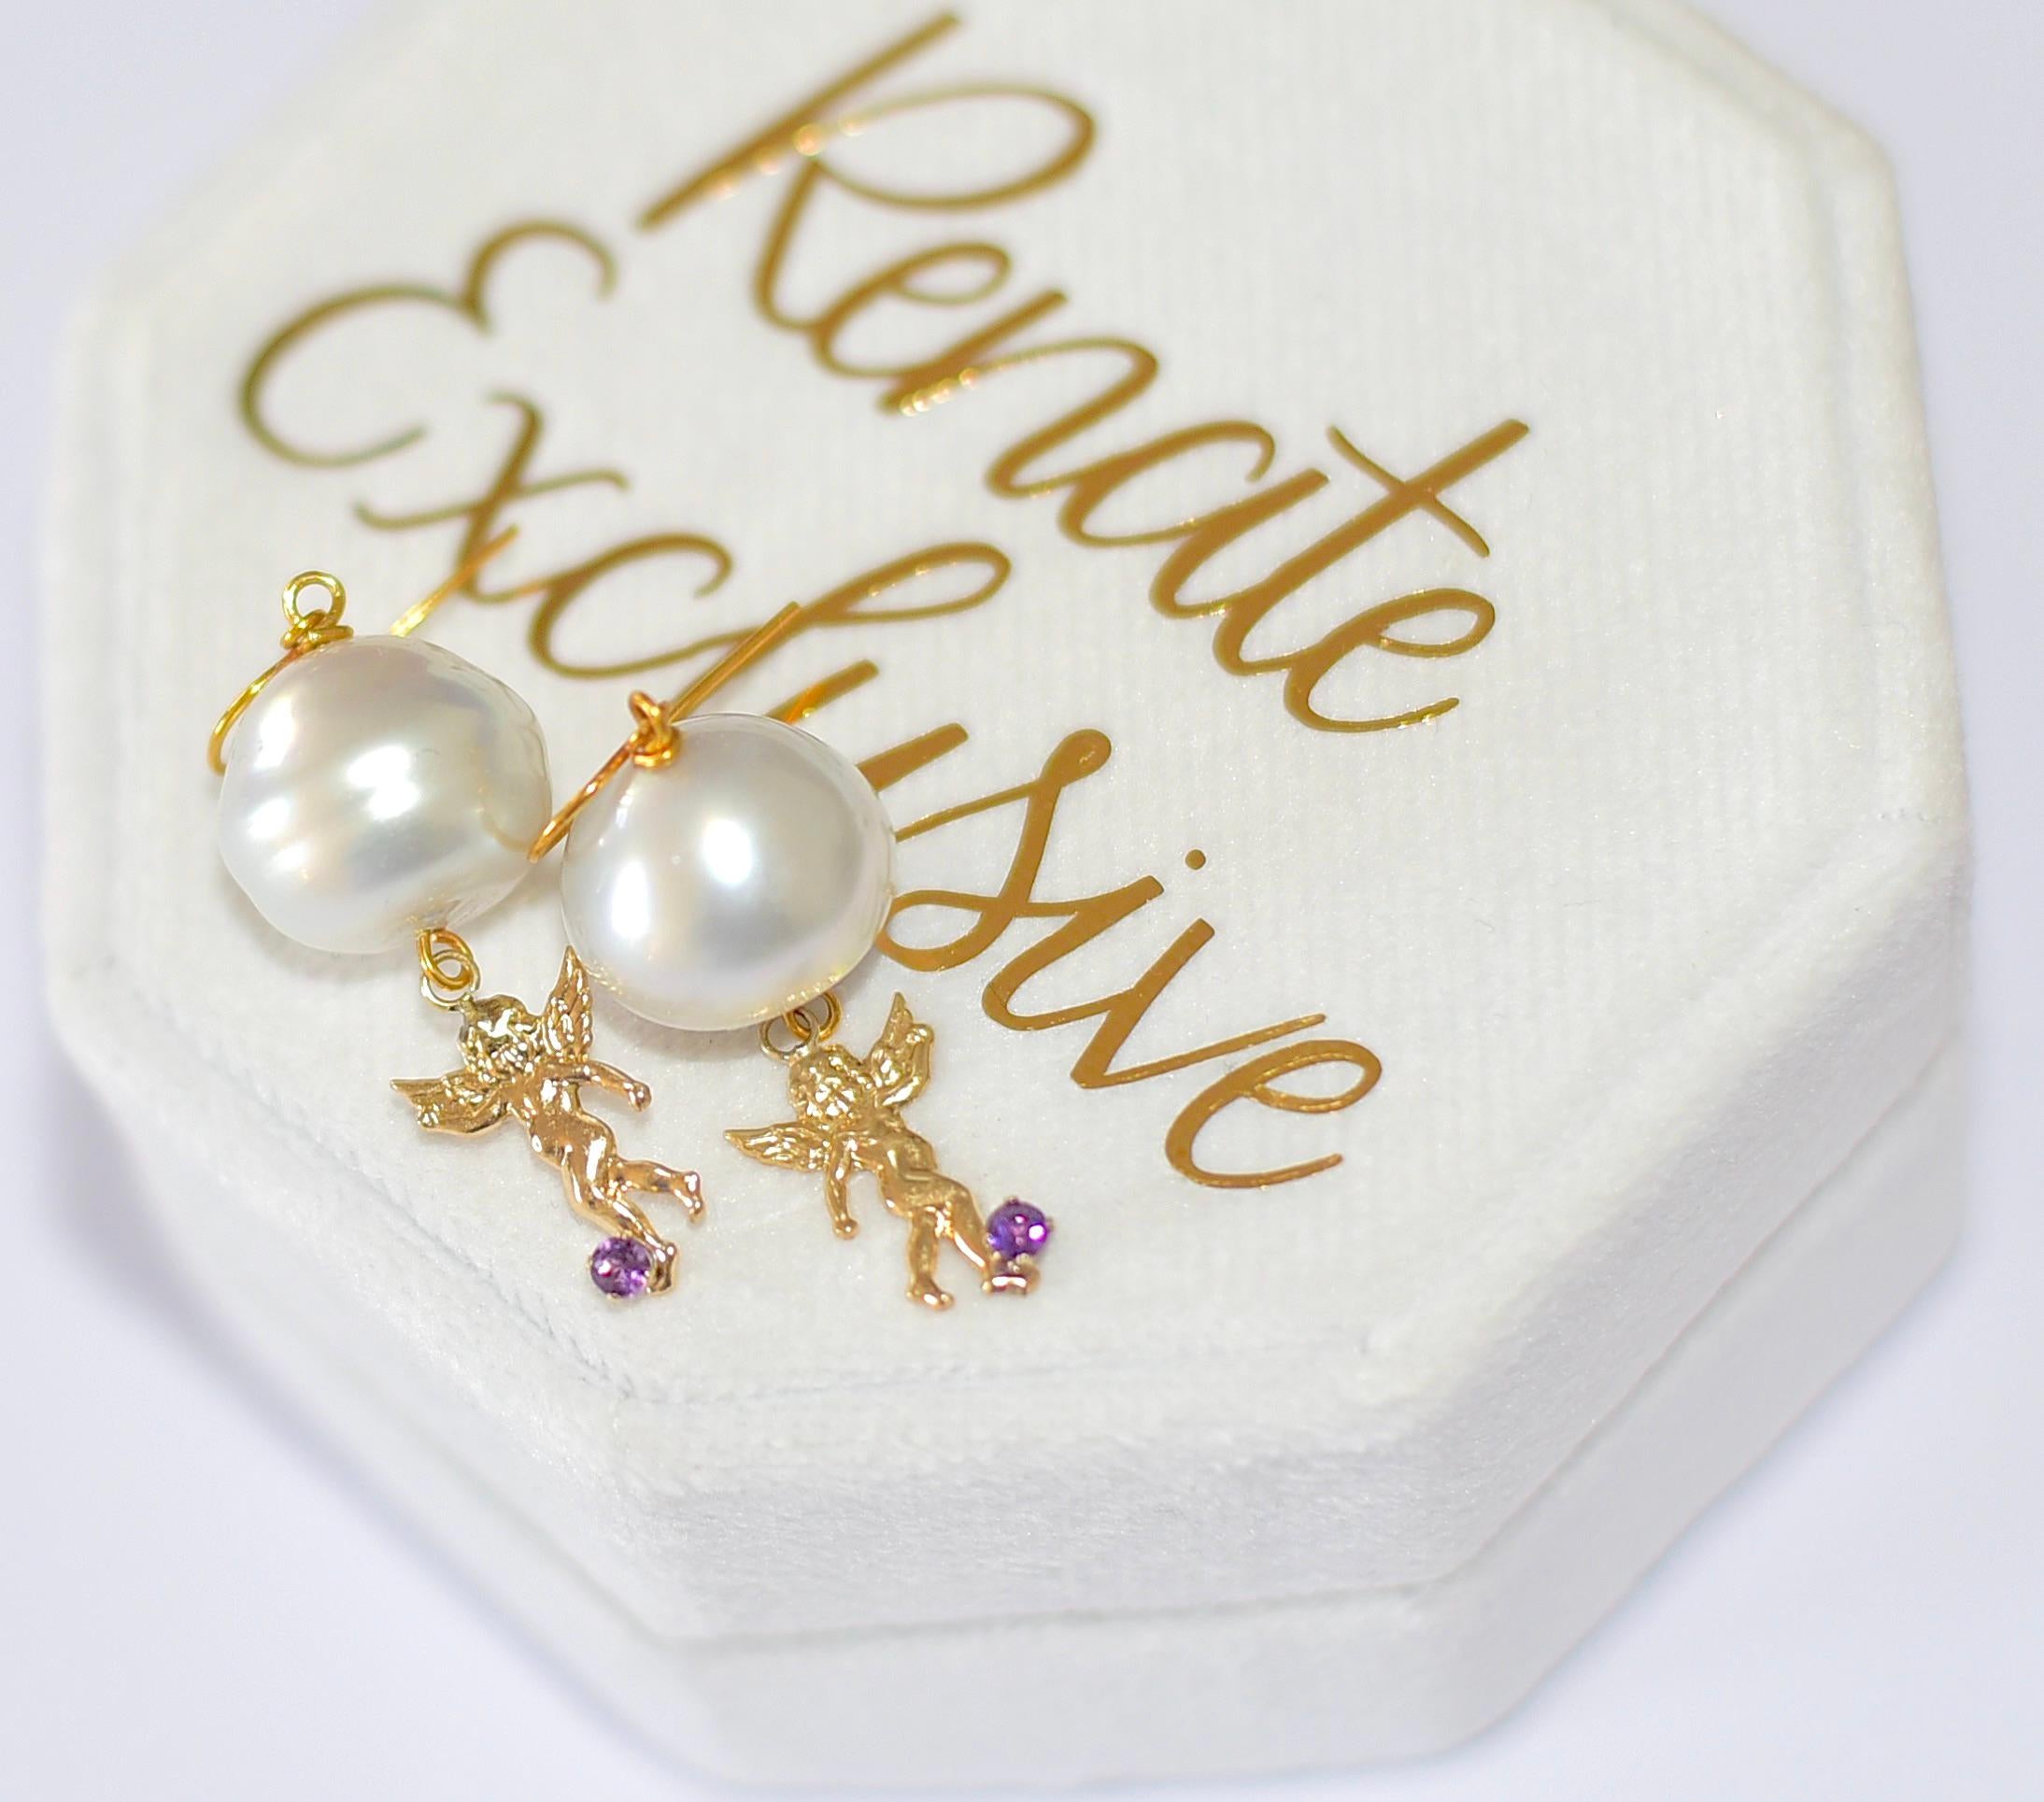 Australian Paspaley Cultured Pearl earrings, 14K Yellow Gold Angel with Amethyst 1